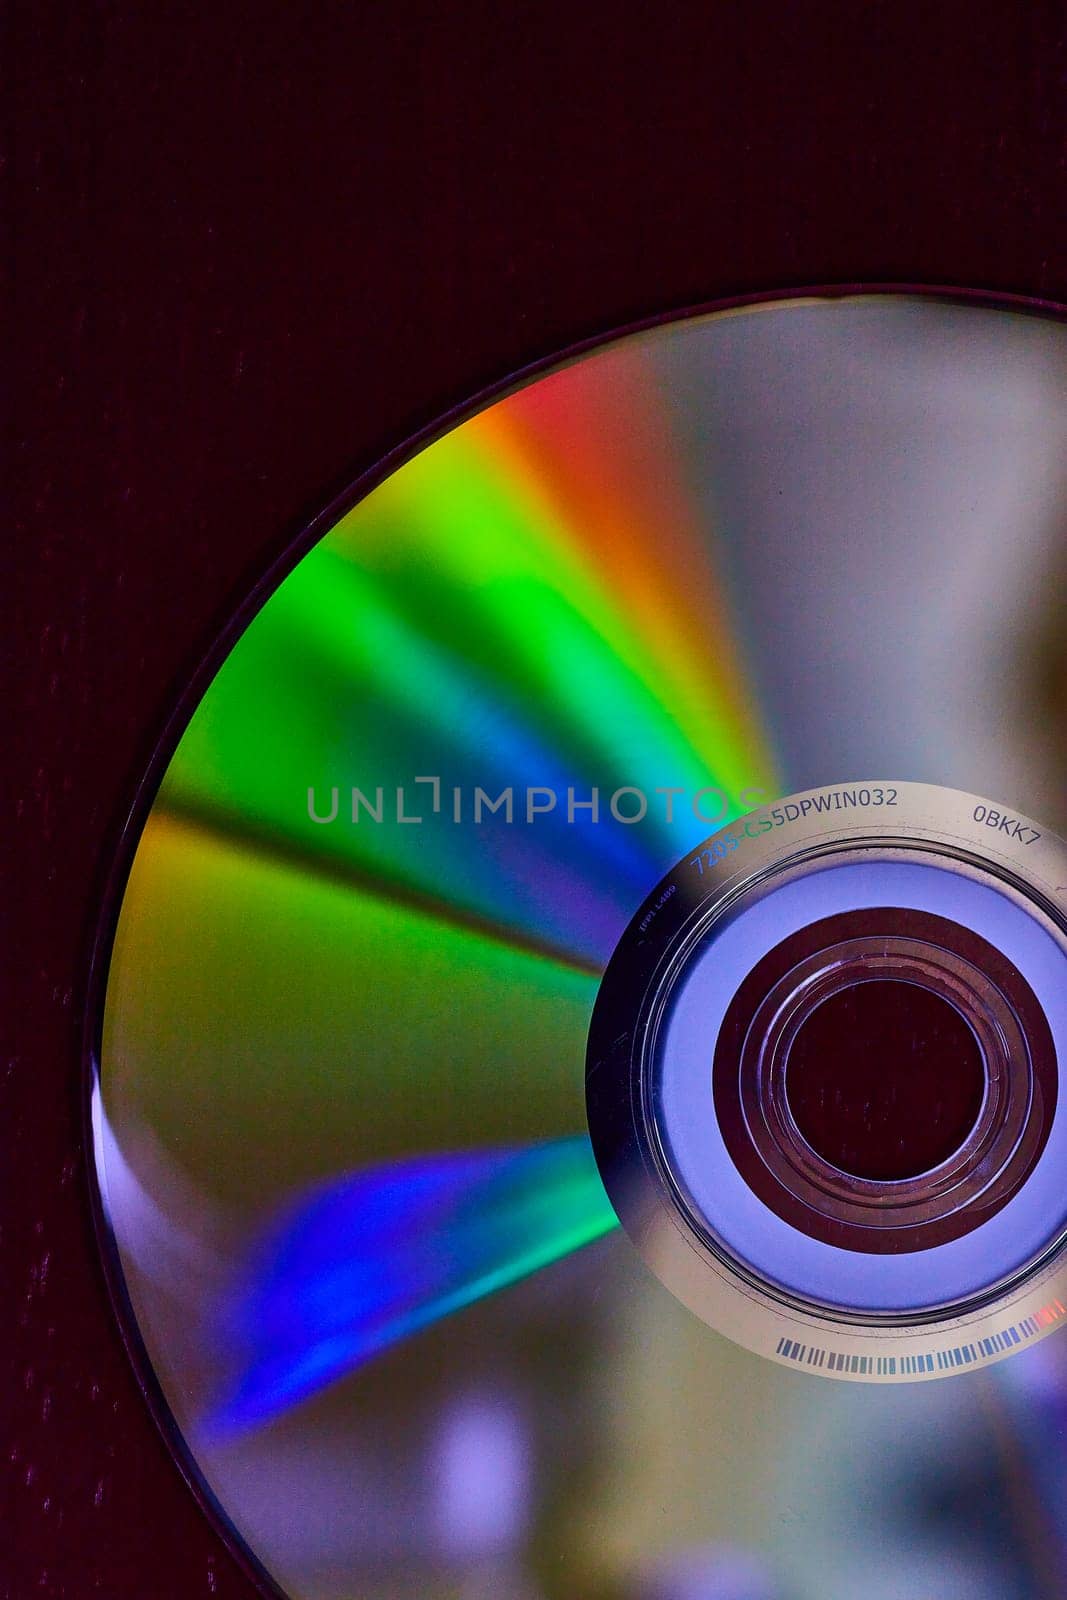 Image of Silver CD on dark background with burst of rainbow colored light across surface